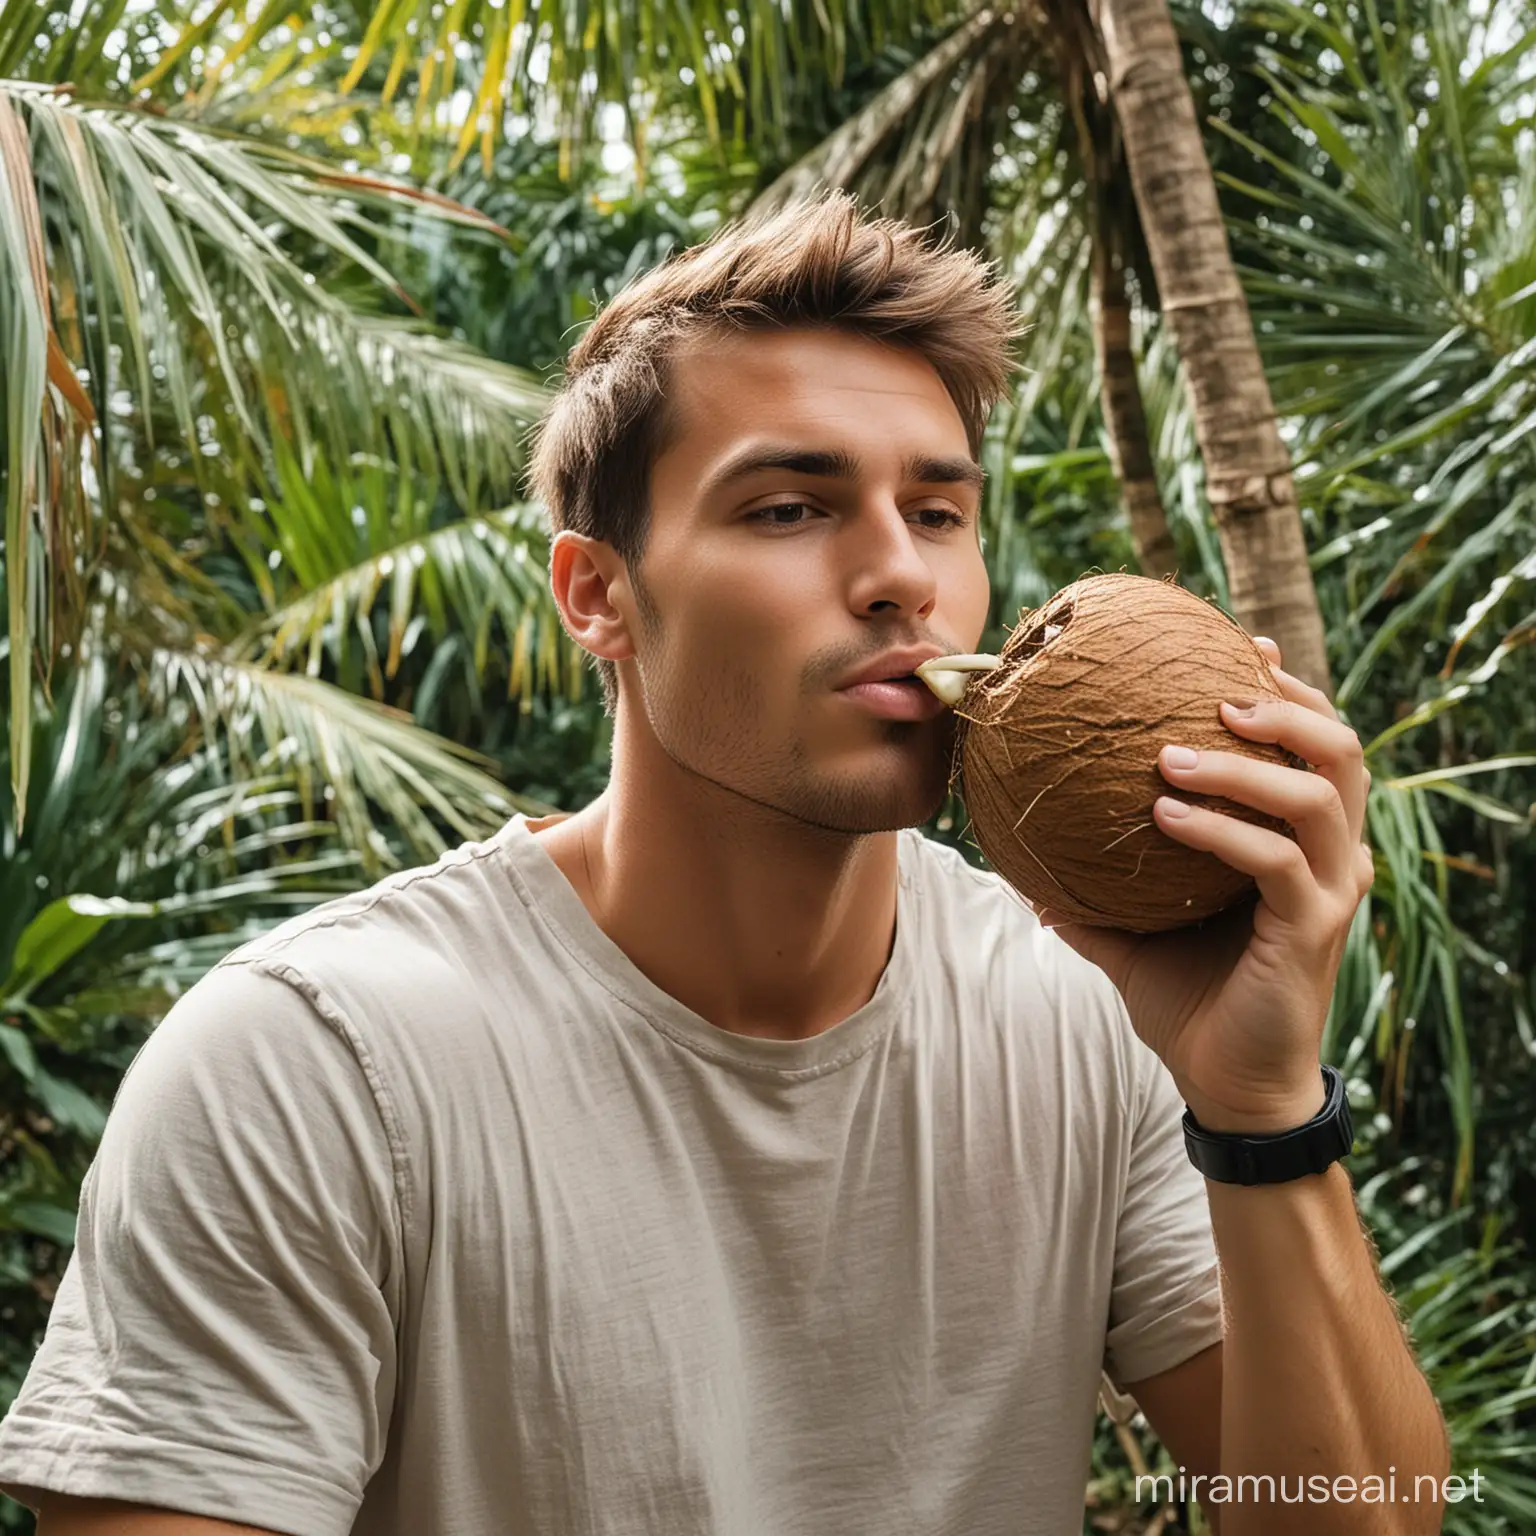 Millennial Man Relaxing in Jungle Sipping Coconut Drink